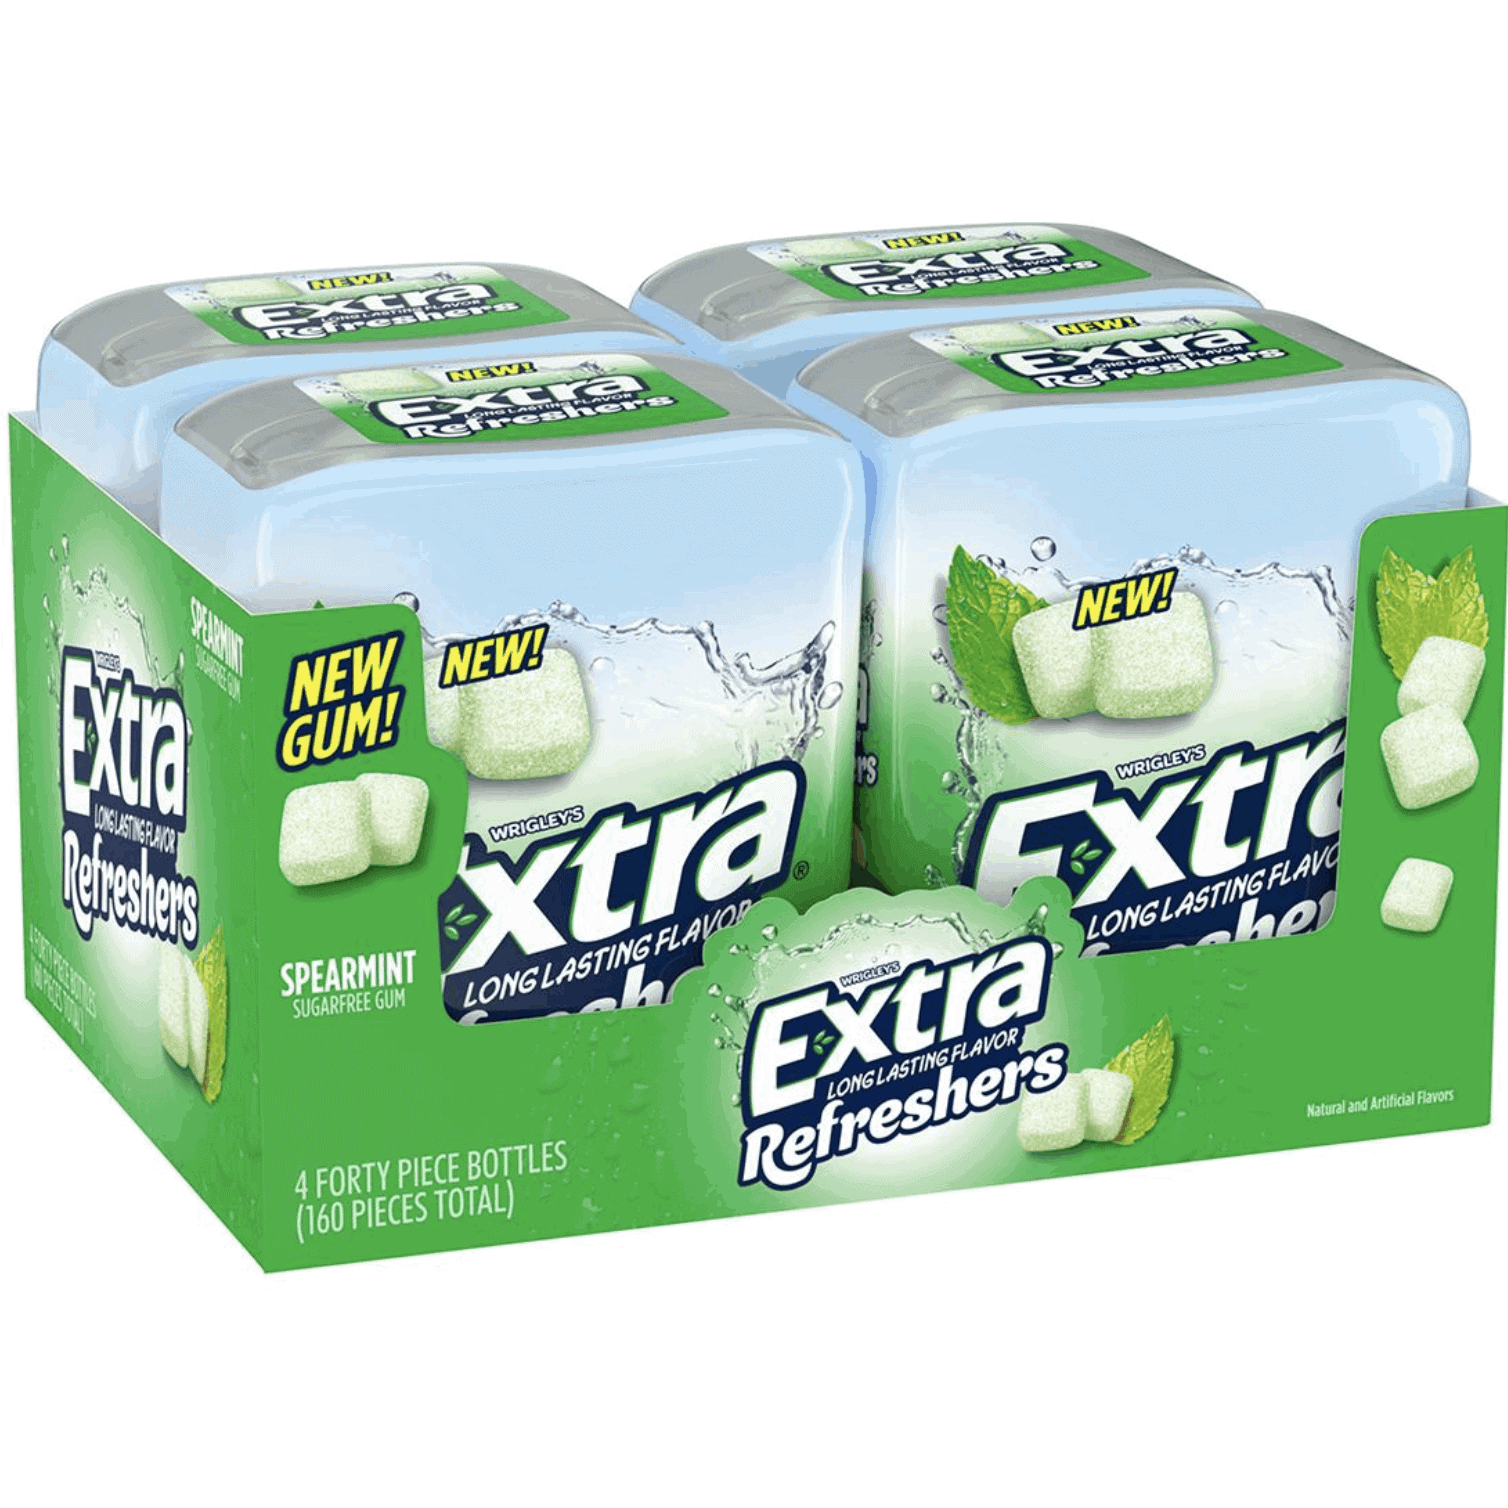 Extra Refreshers Spearmint Chewing Gum, 4 pk.